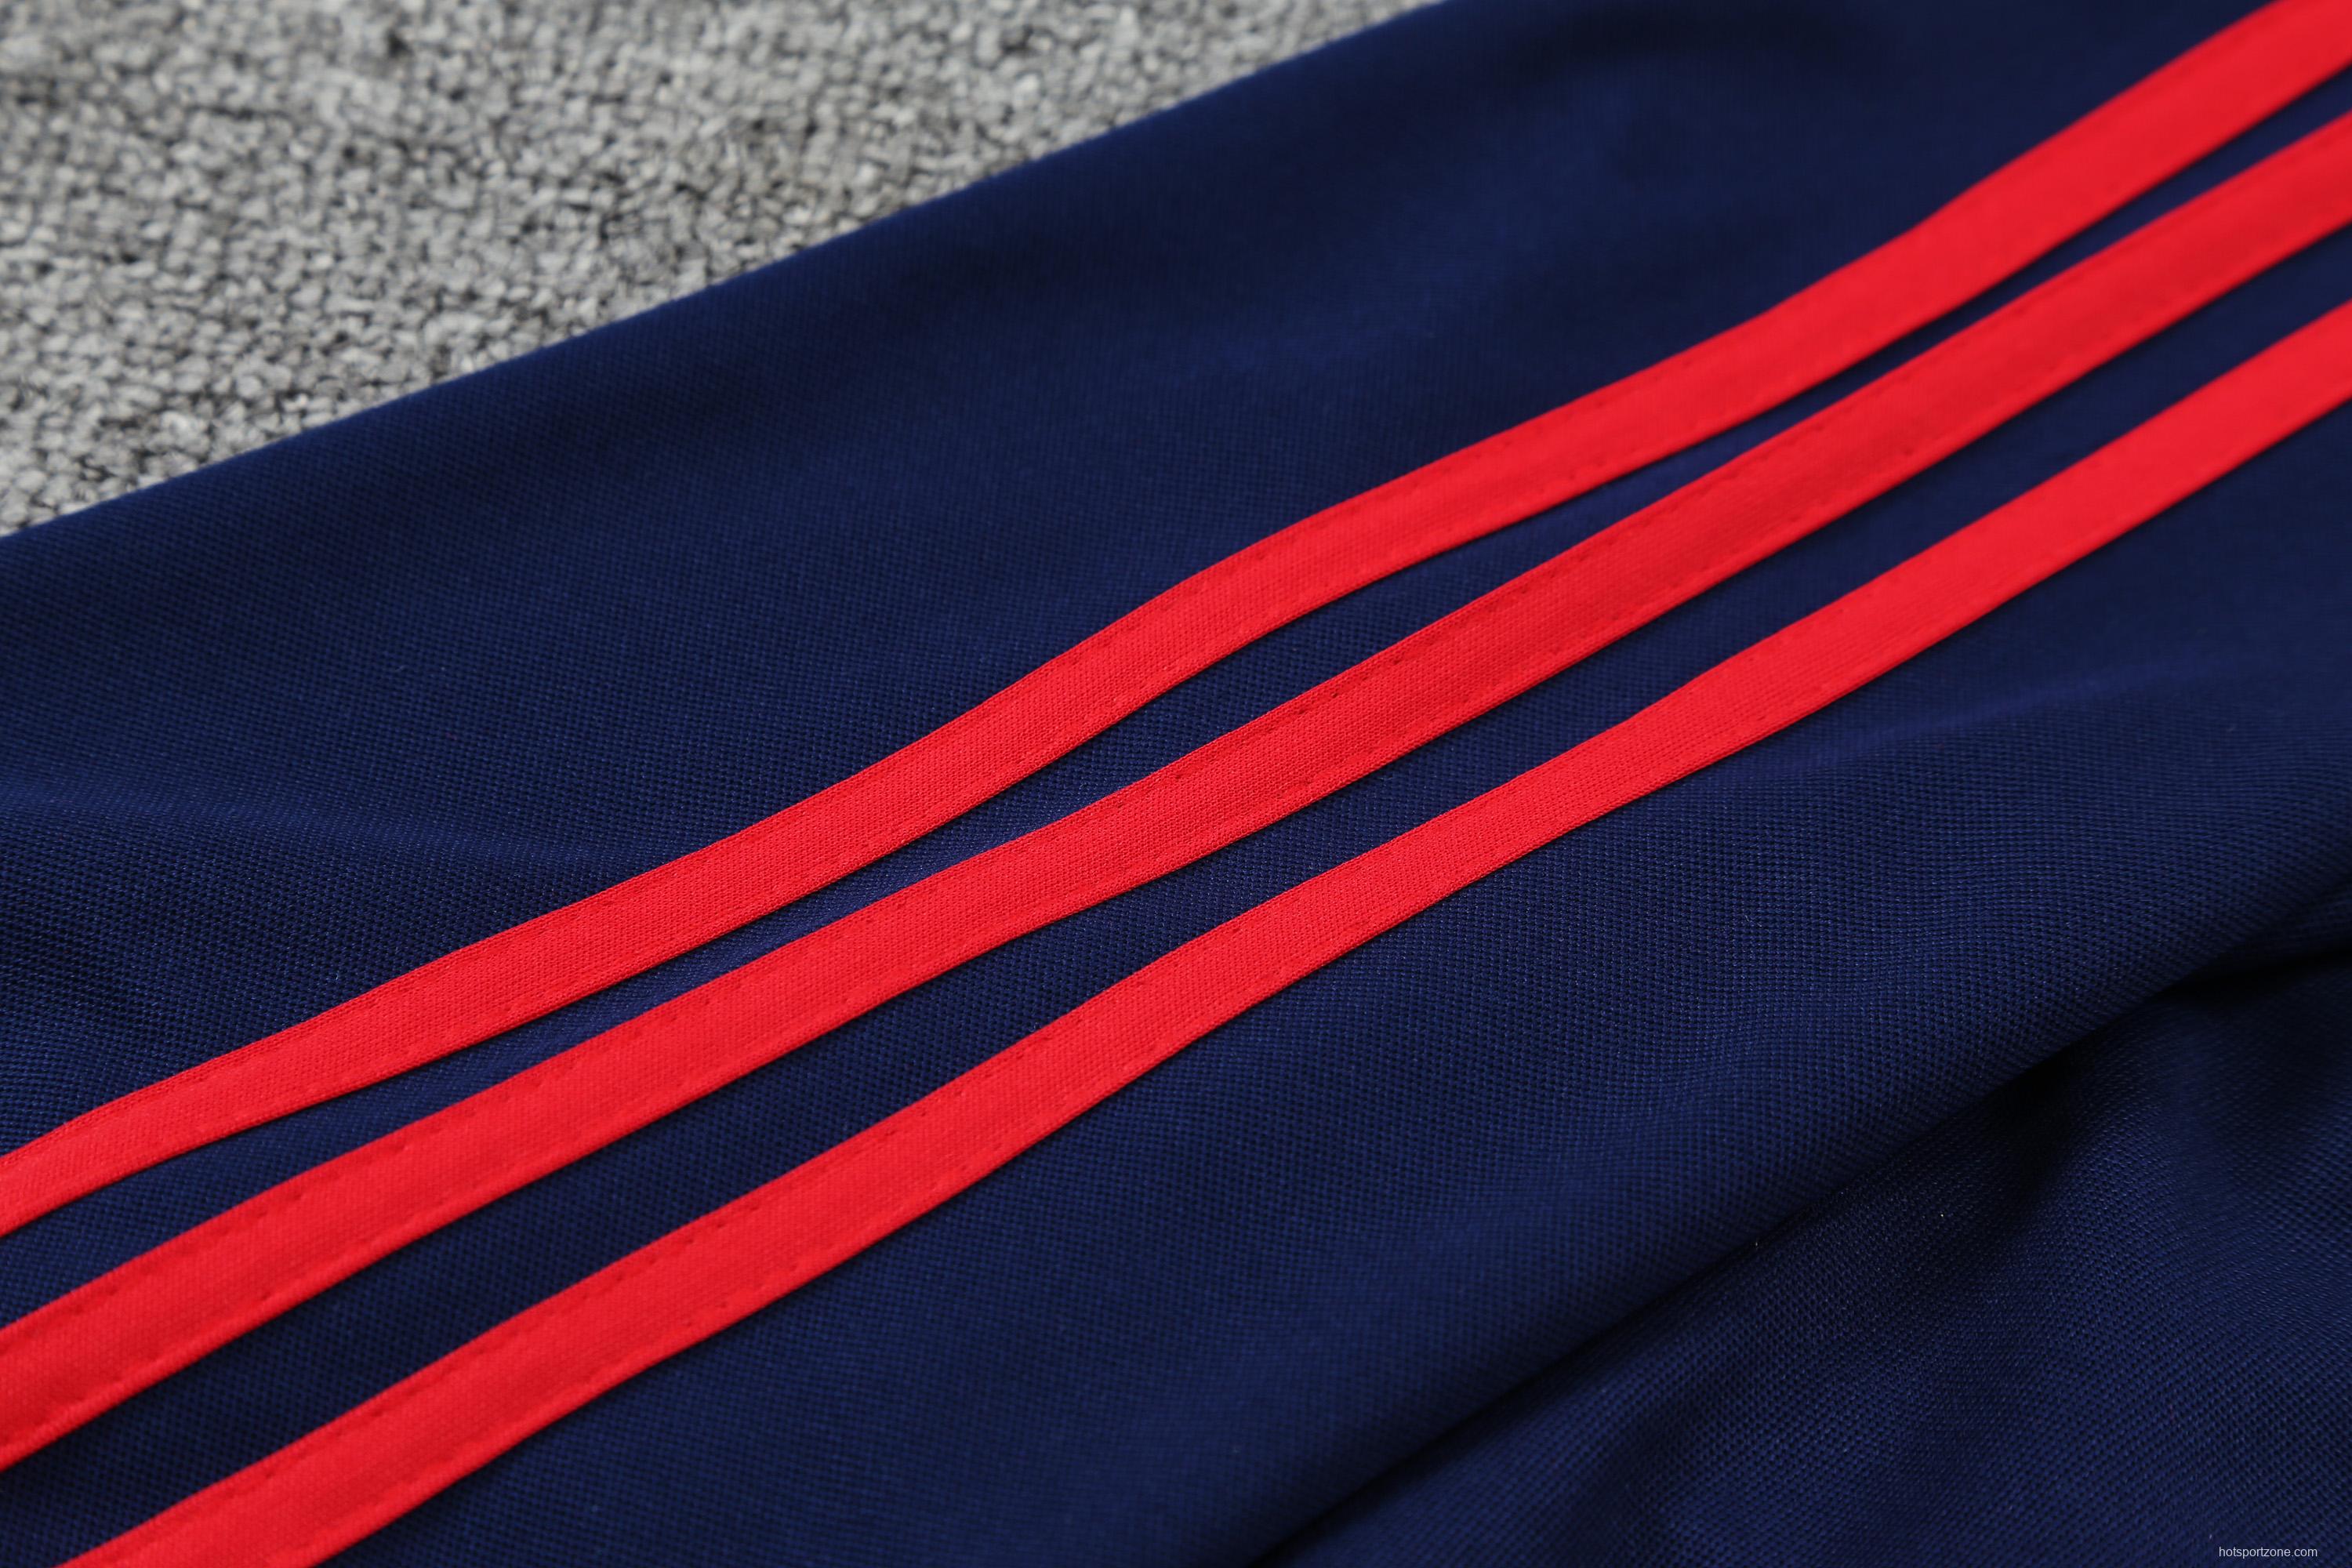 Bayern Munich POLO kit dark blue and red stripes (not supported to be sold separately)